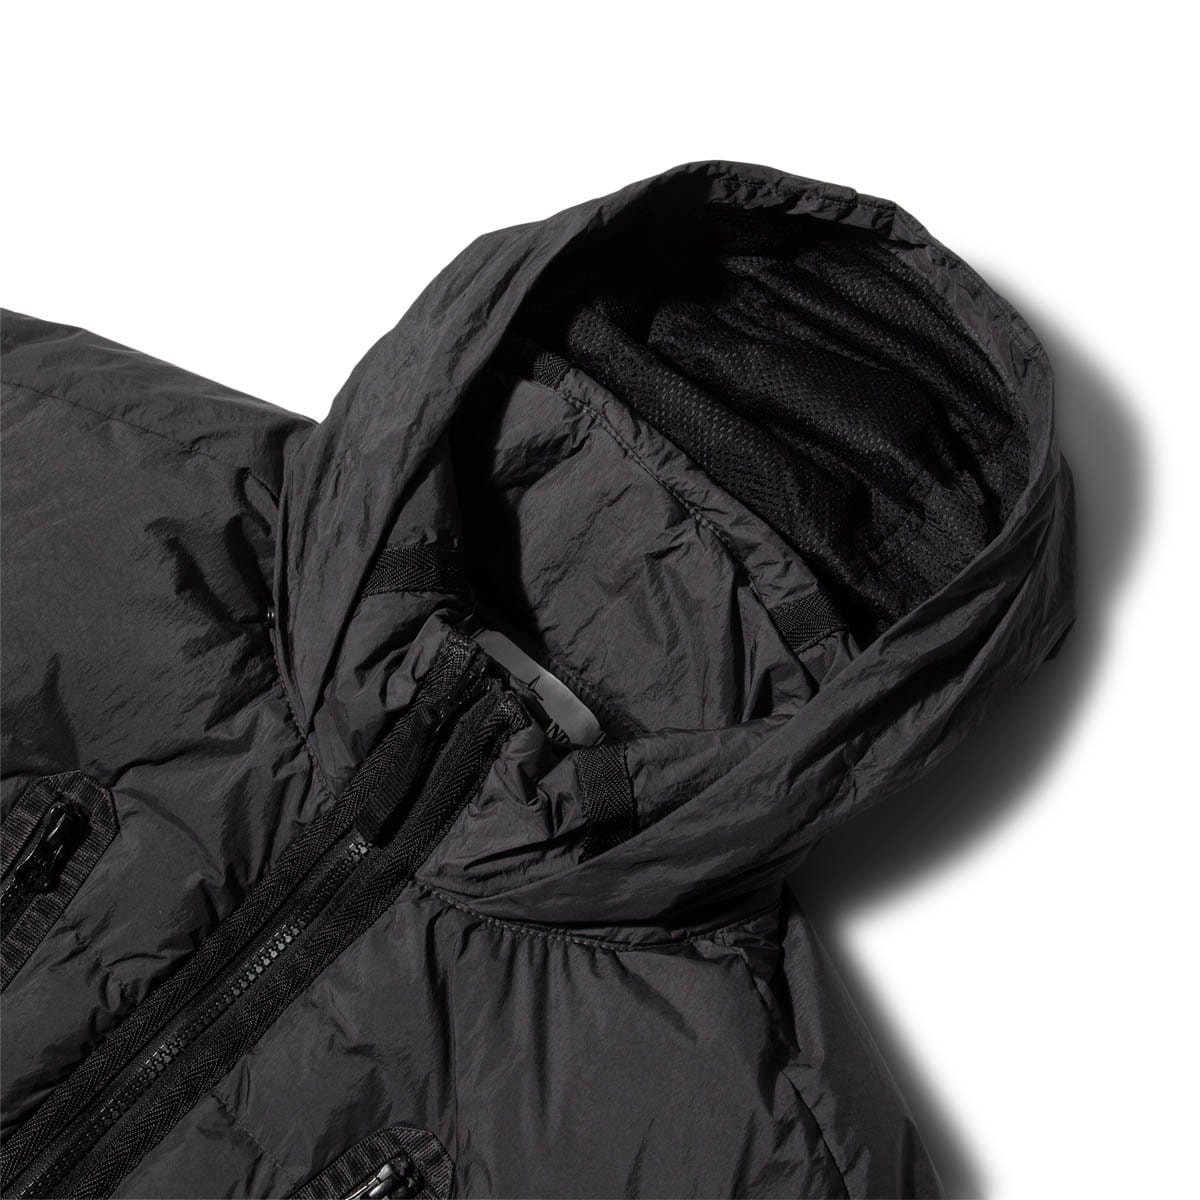 Stone Island Outerwear REAL DOWN JACKET 751540223